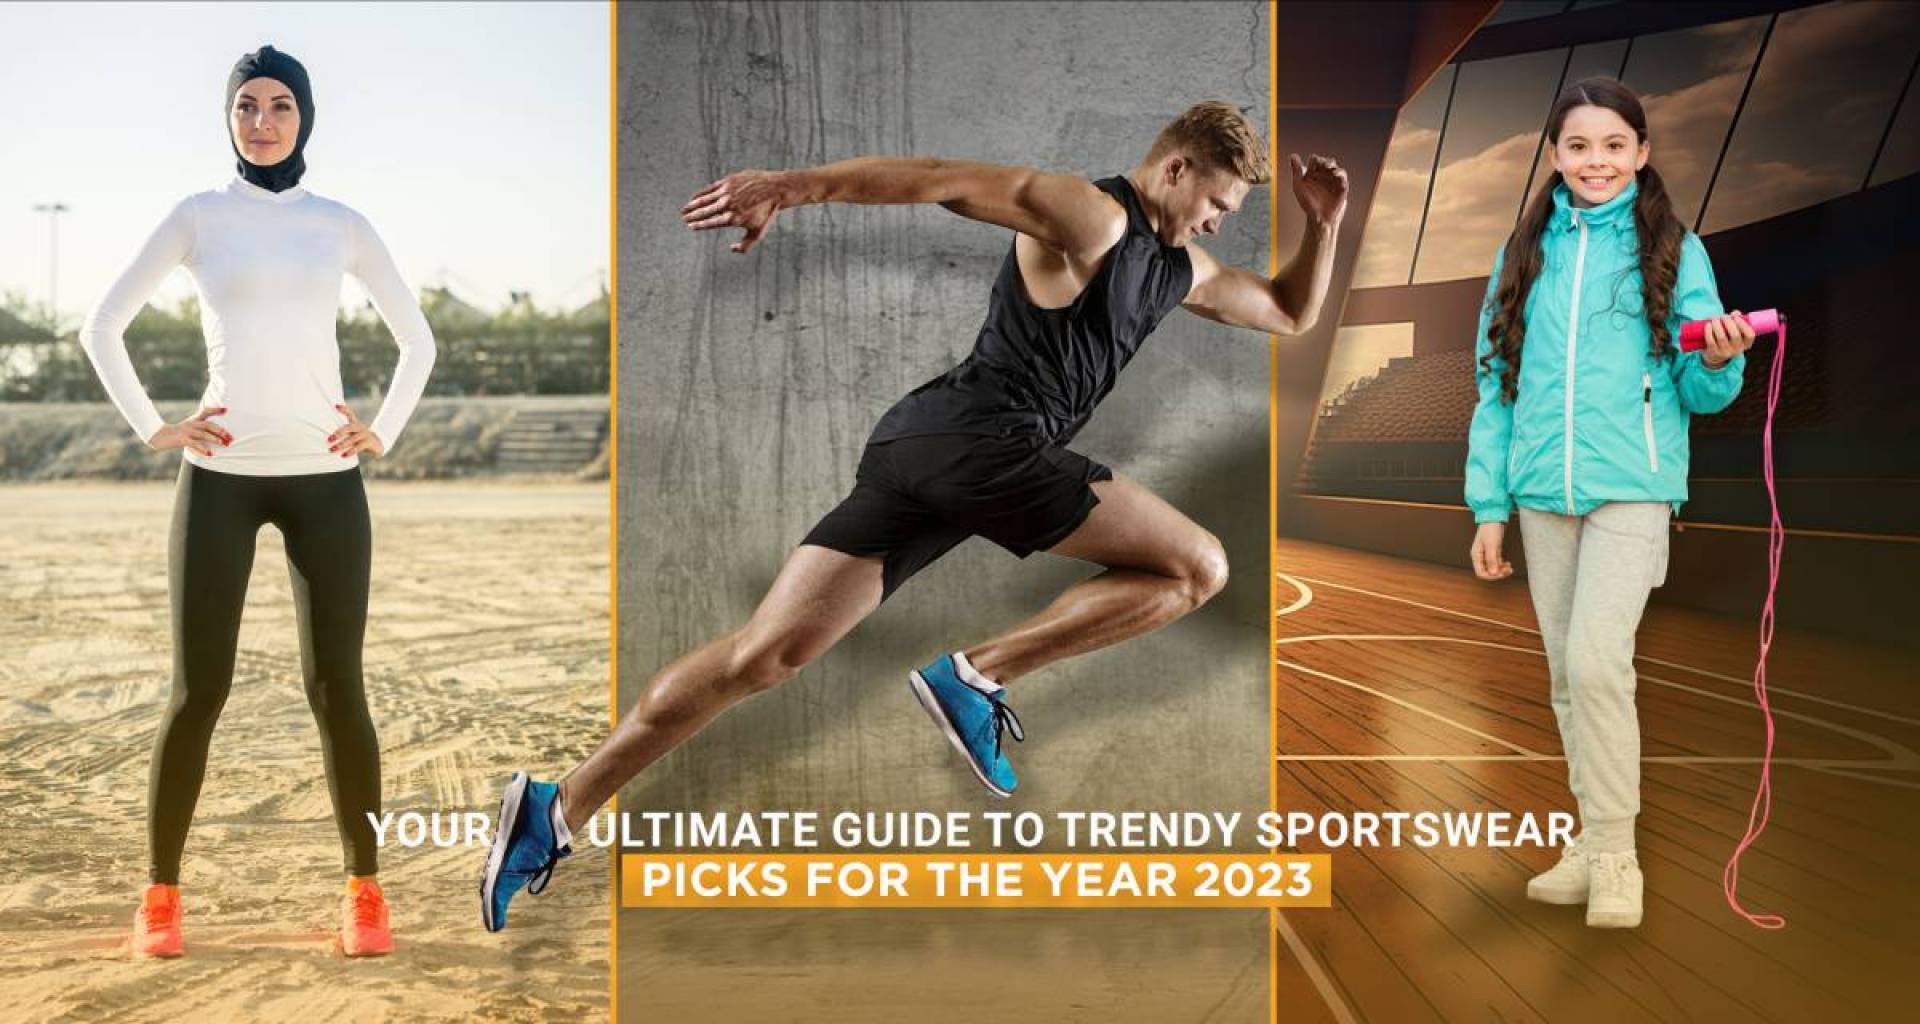 Your Ultimate Guide to Trendy Sportswear Picks for the Year 2023